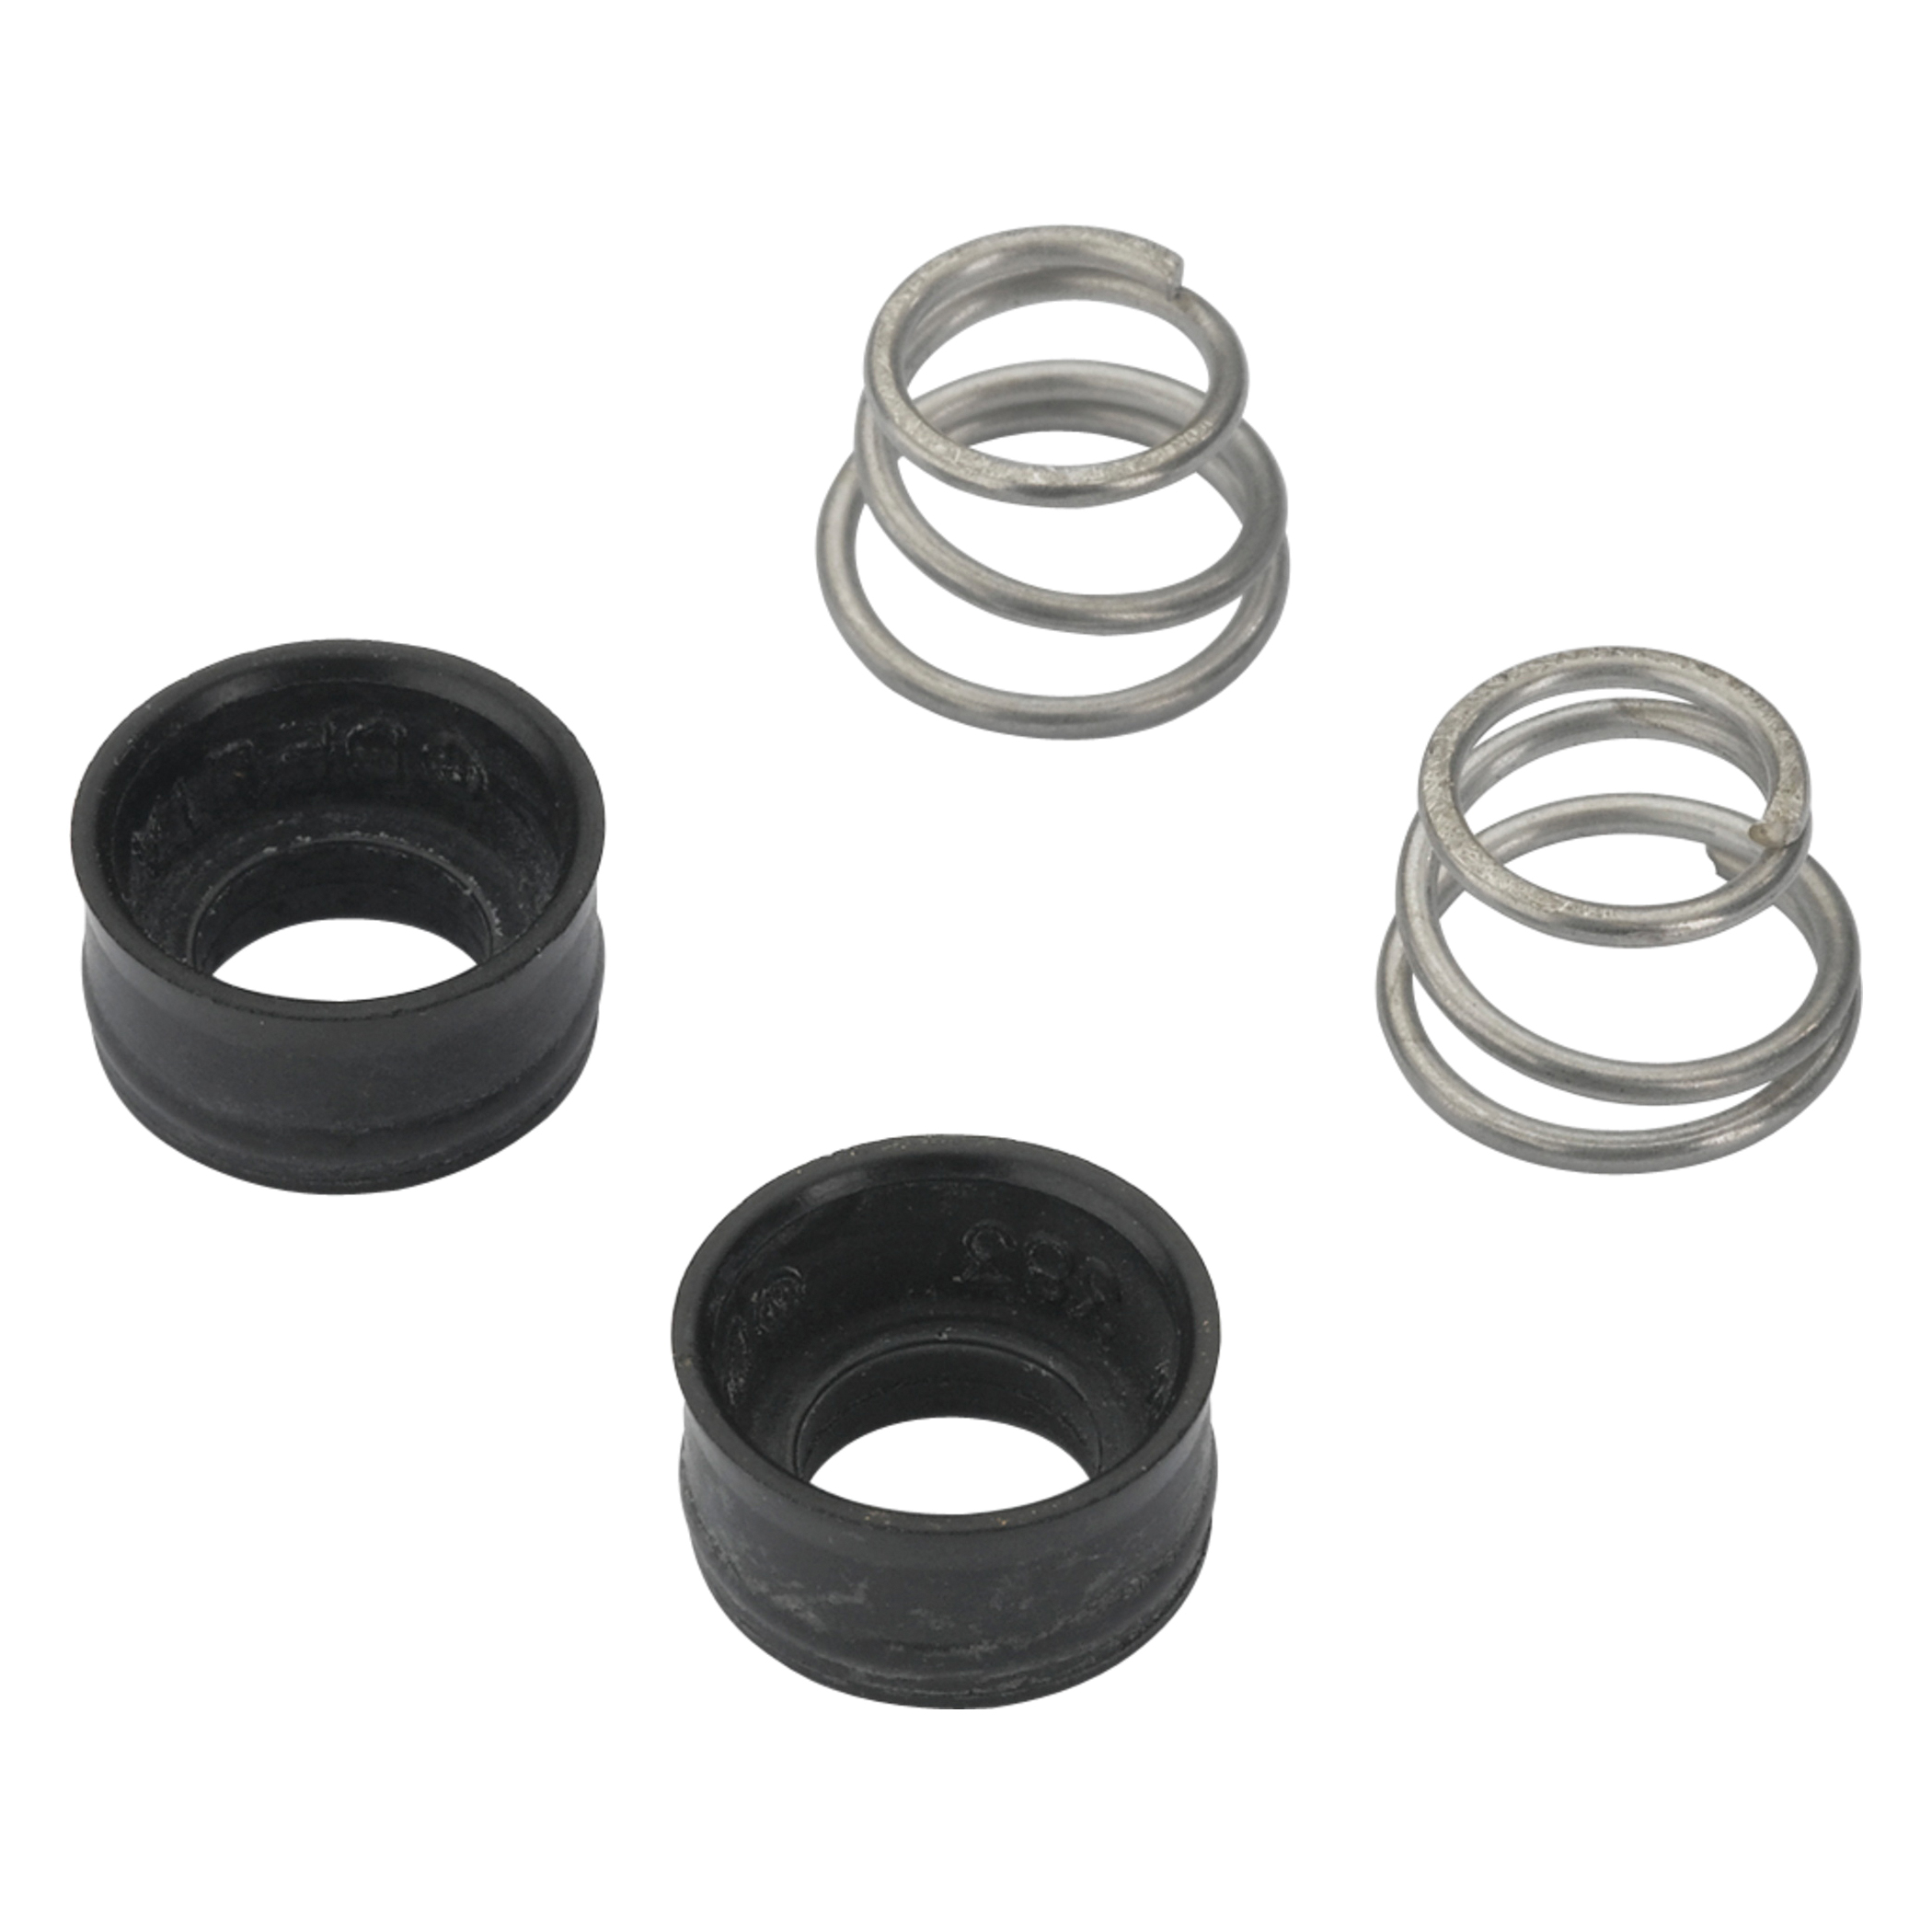 DELTA® RP4993 Replacement Seats and Springs Kit, For Use With Kitchen and Bath Valve, Import